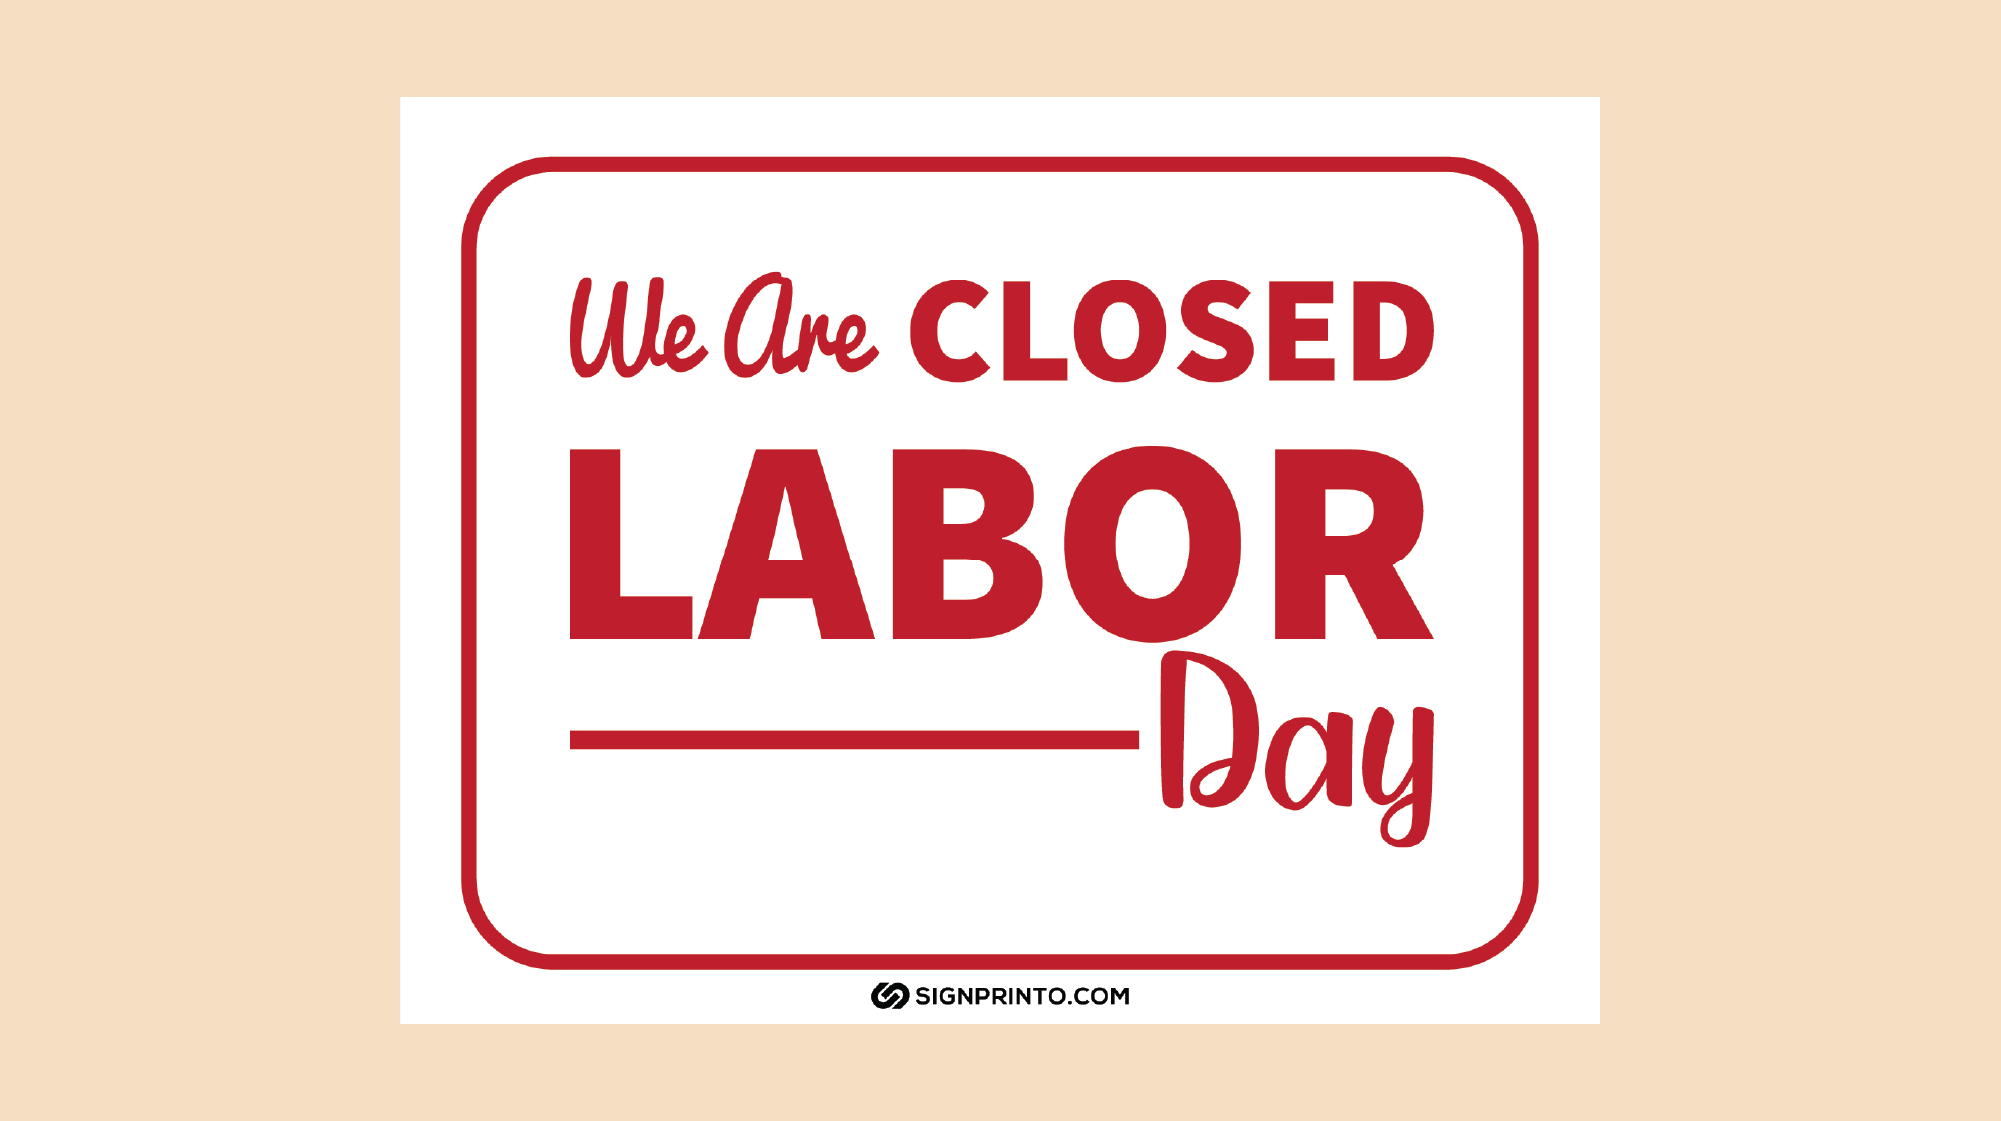 we are closed labor day - Labor Day closed sign